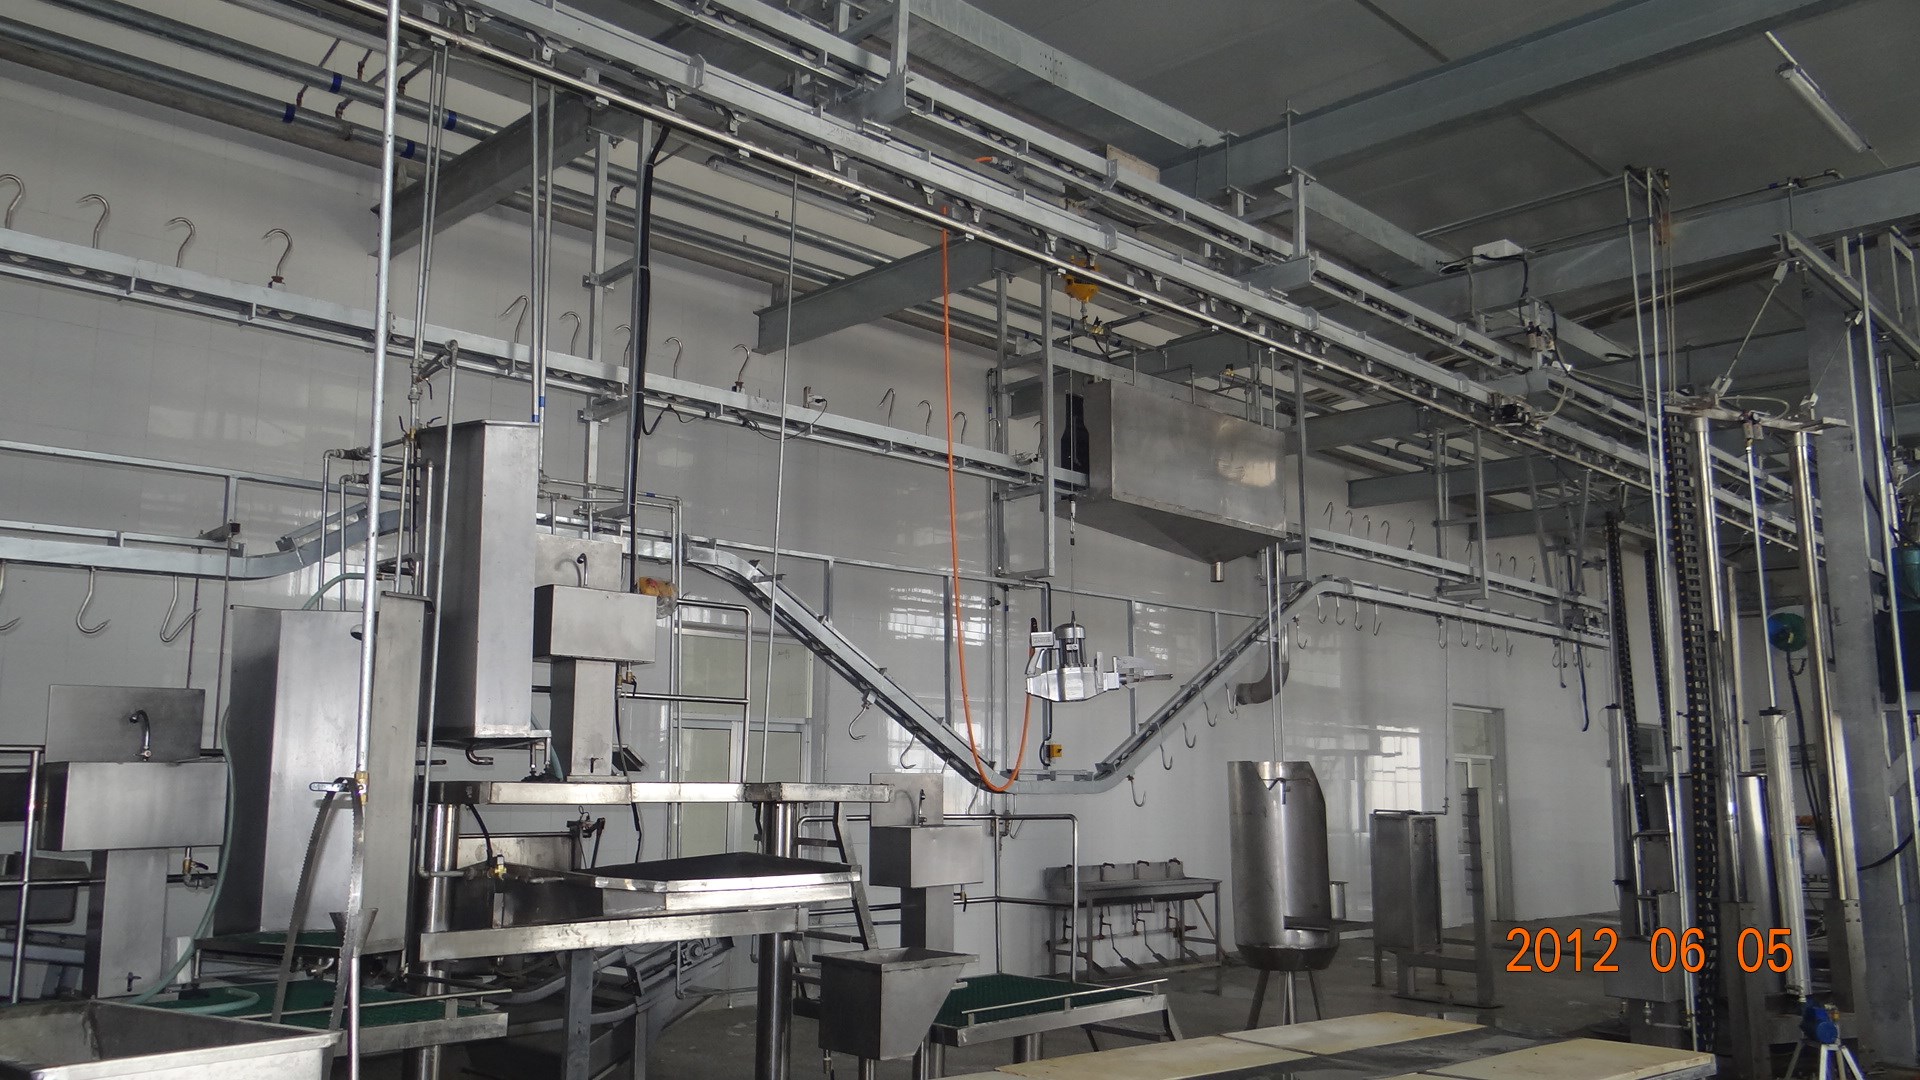 How does the slaughter processing equipment industry open up the market?